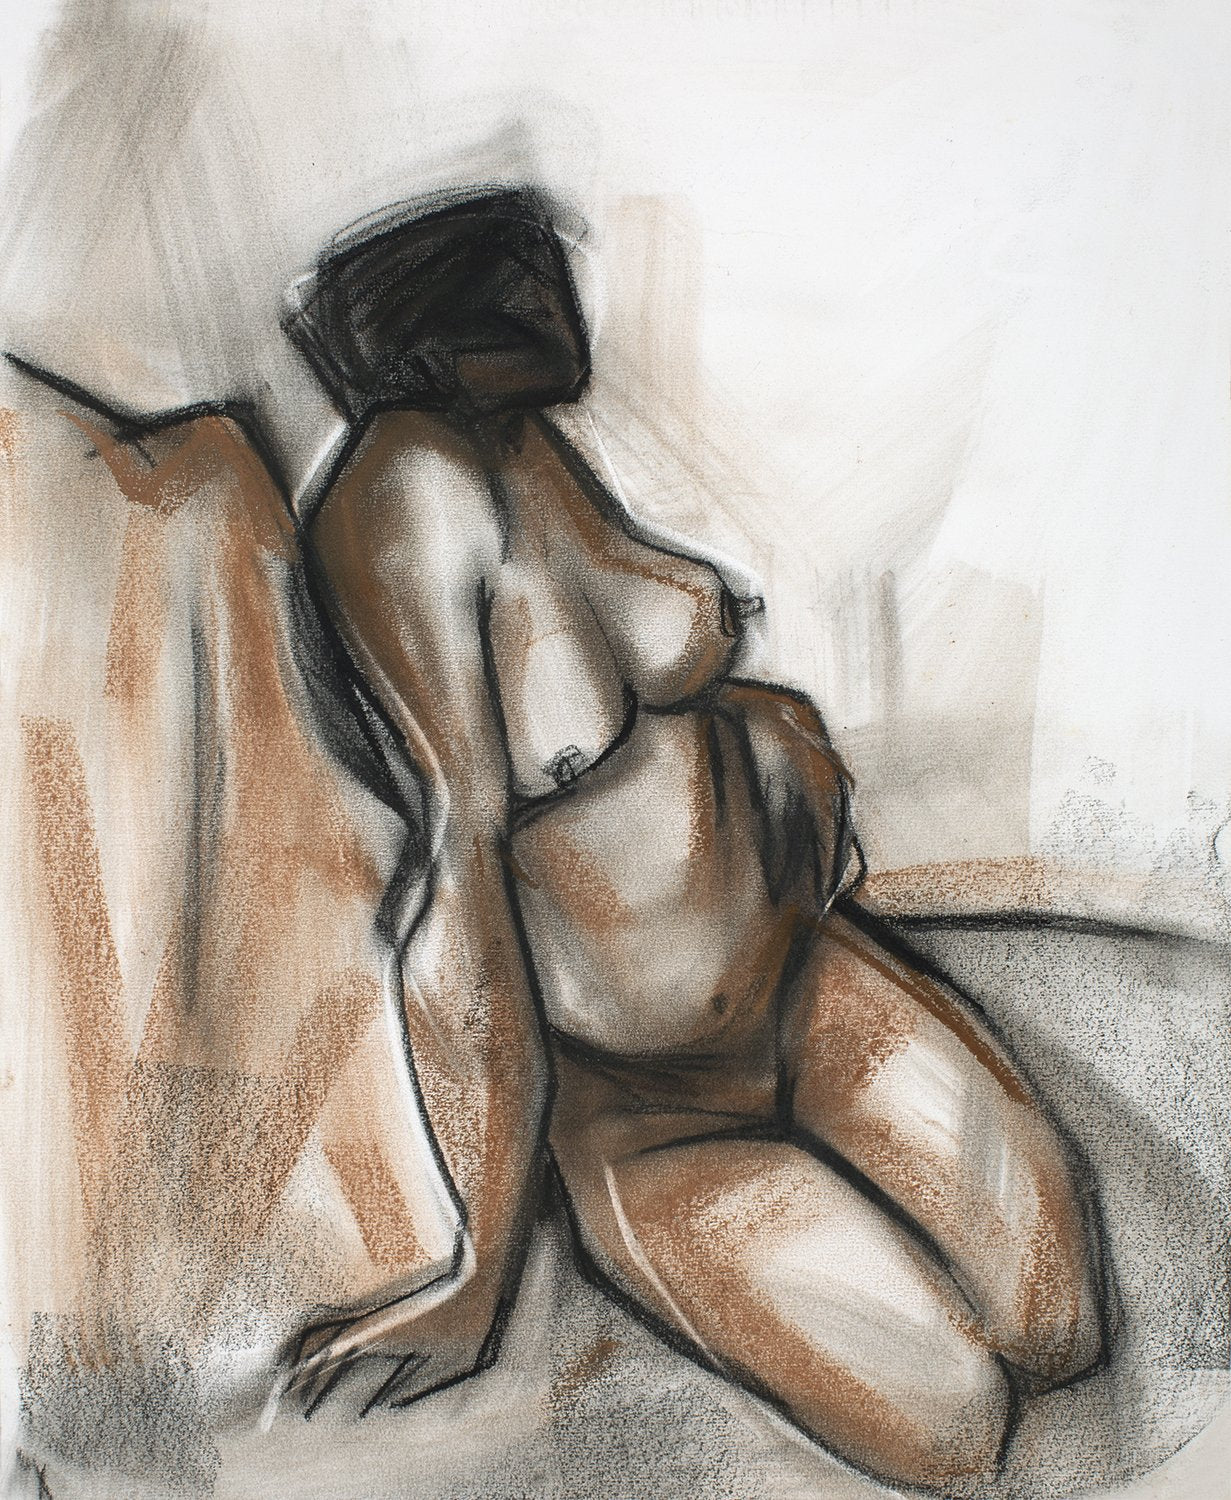 Nude 37|S. Mark Rathinaraj- Charcoal on Board, , 17 x 13.5 inches